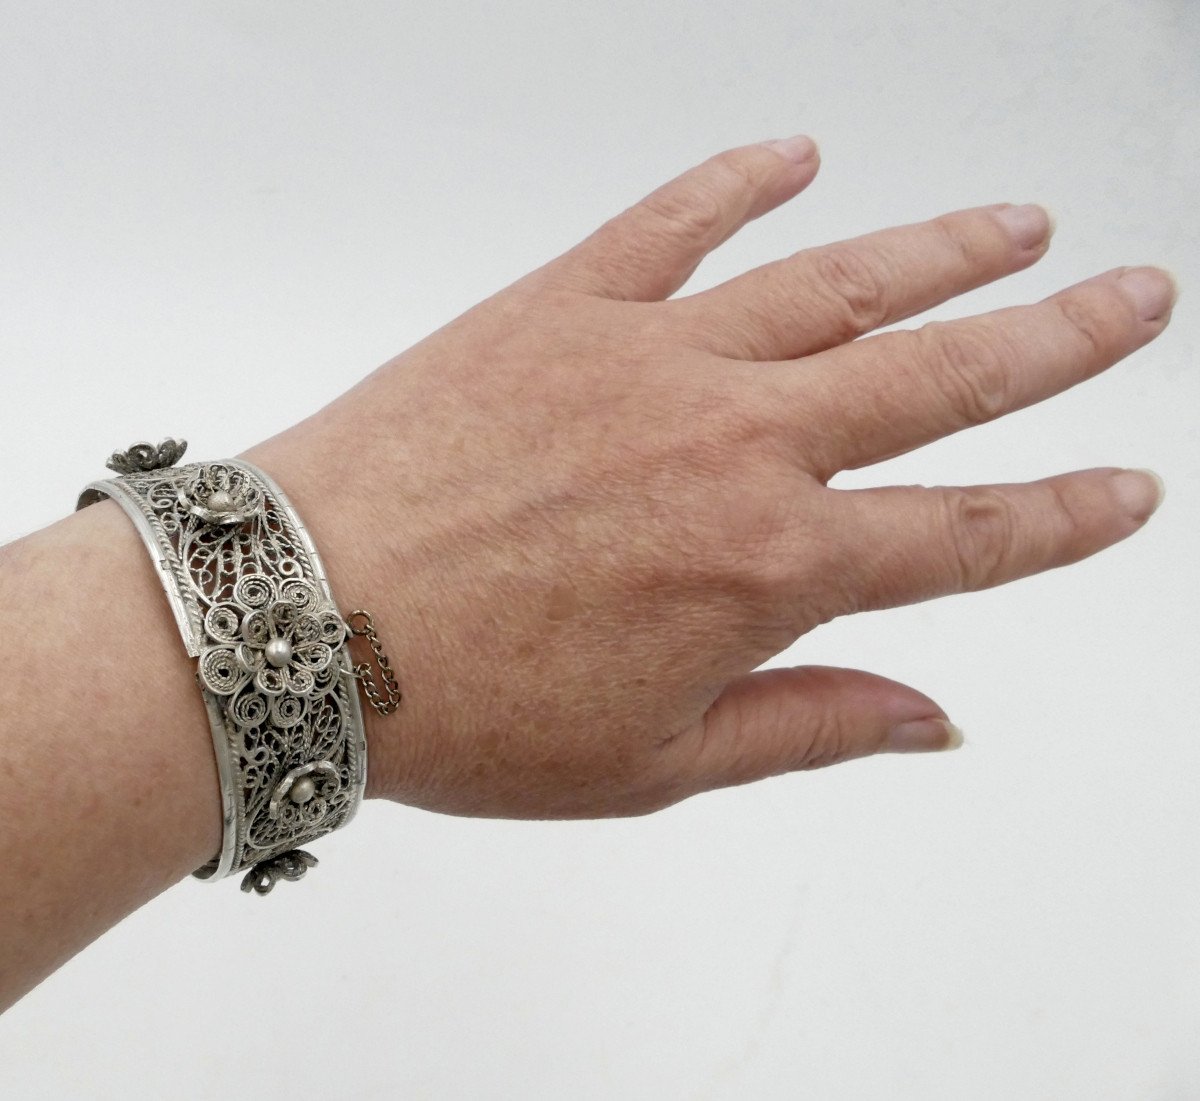 Cuff Bracelet With Flower Decor, Sterling Silver, Tunisia, 20th Century.-photo-4